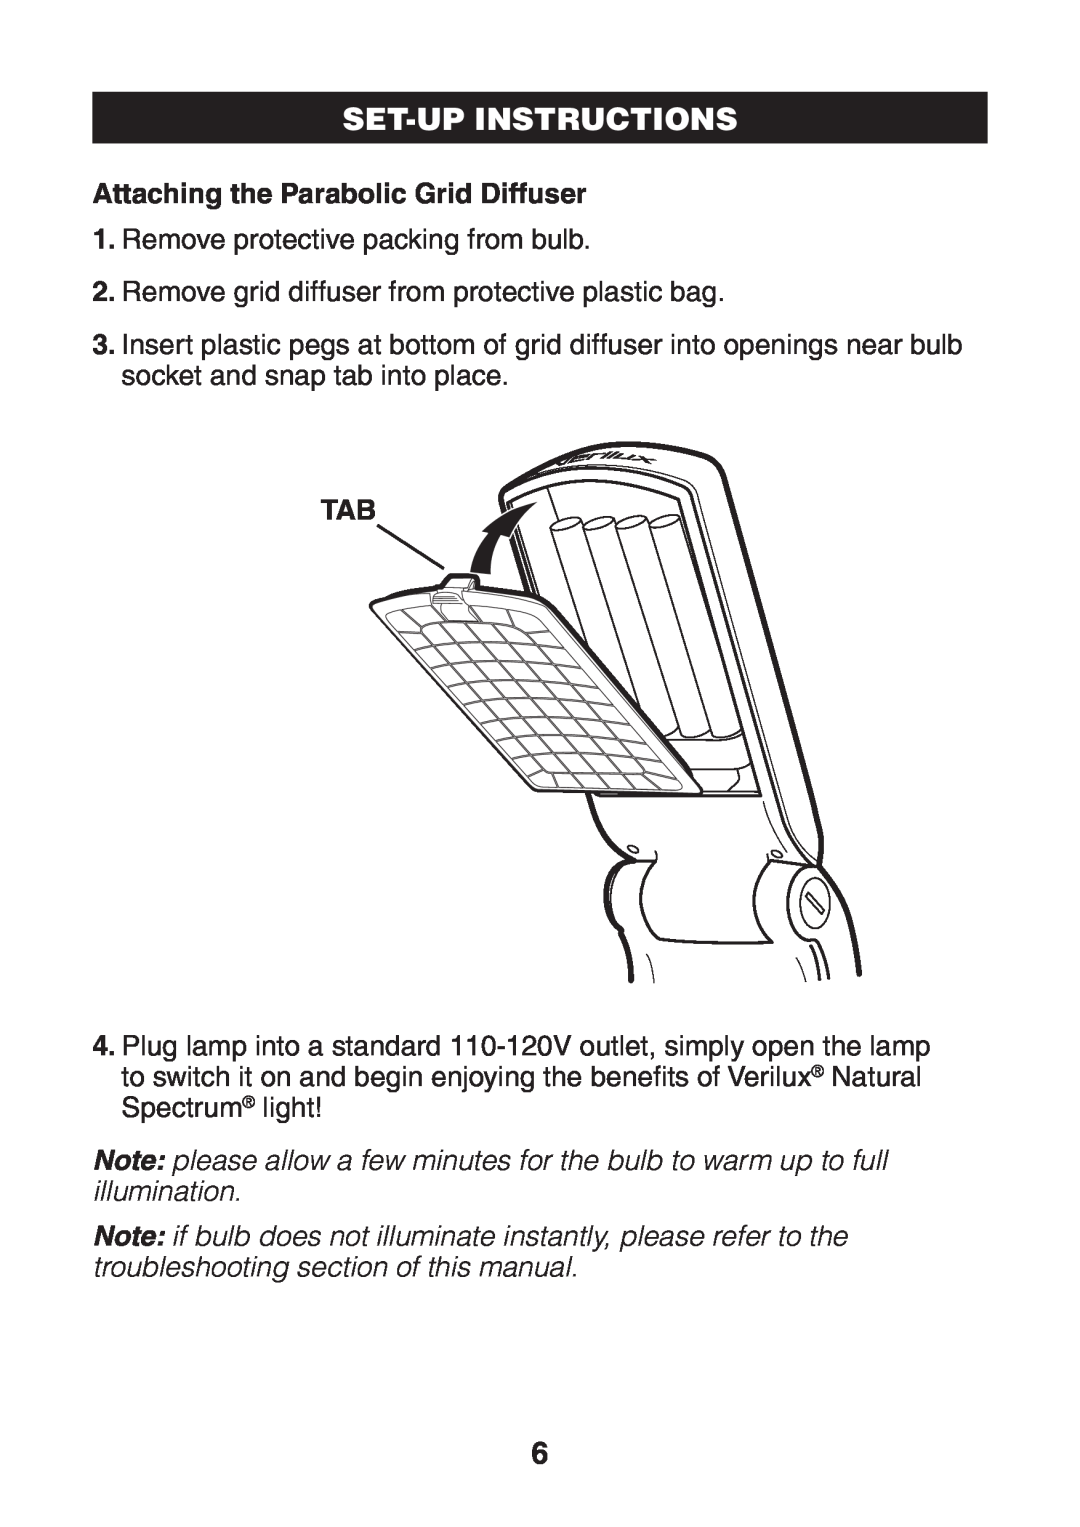 Verilux VP02 manual Attaching the Parabolic Grid Diffuser, Set-Upinstructions 